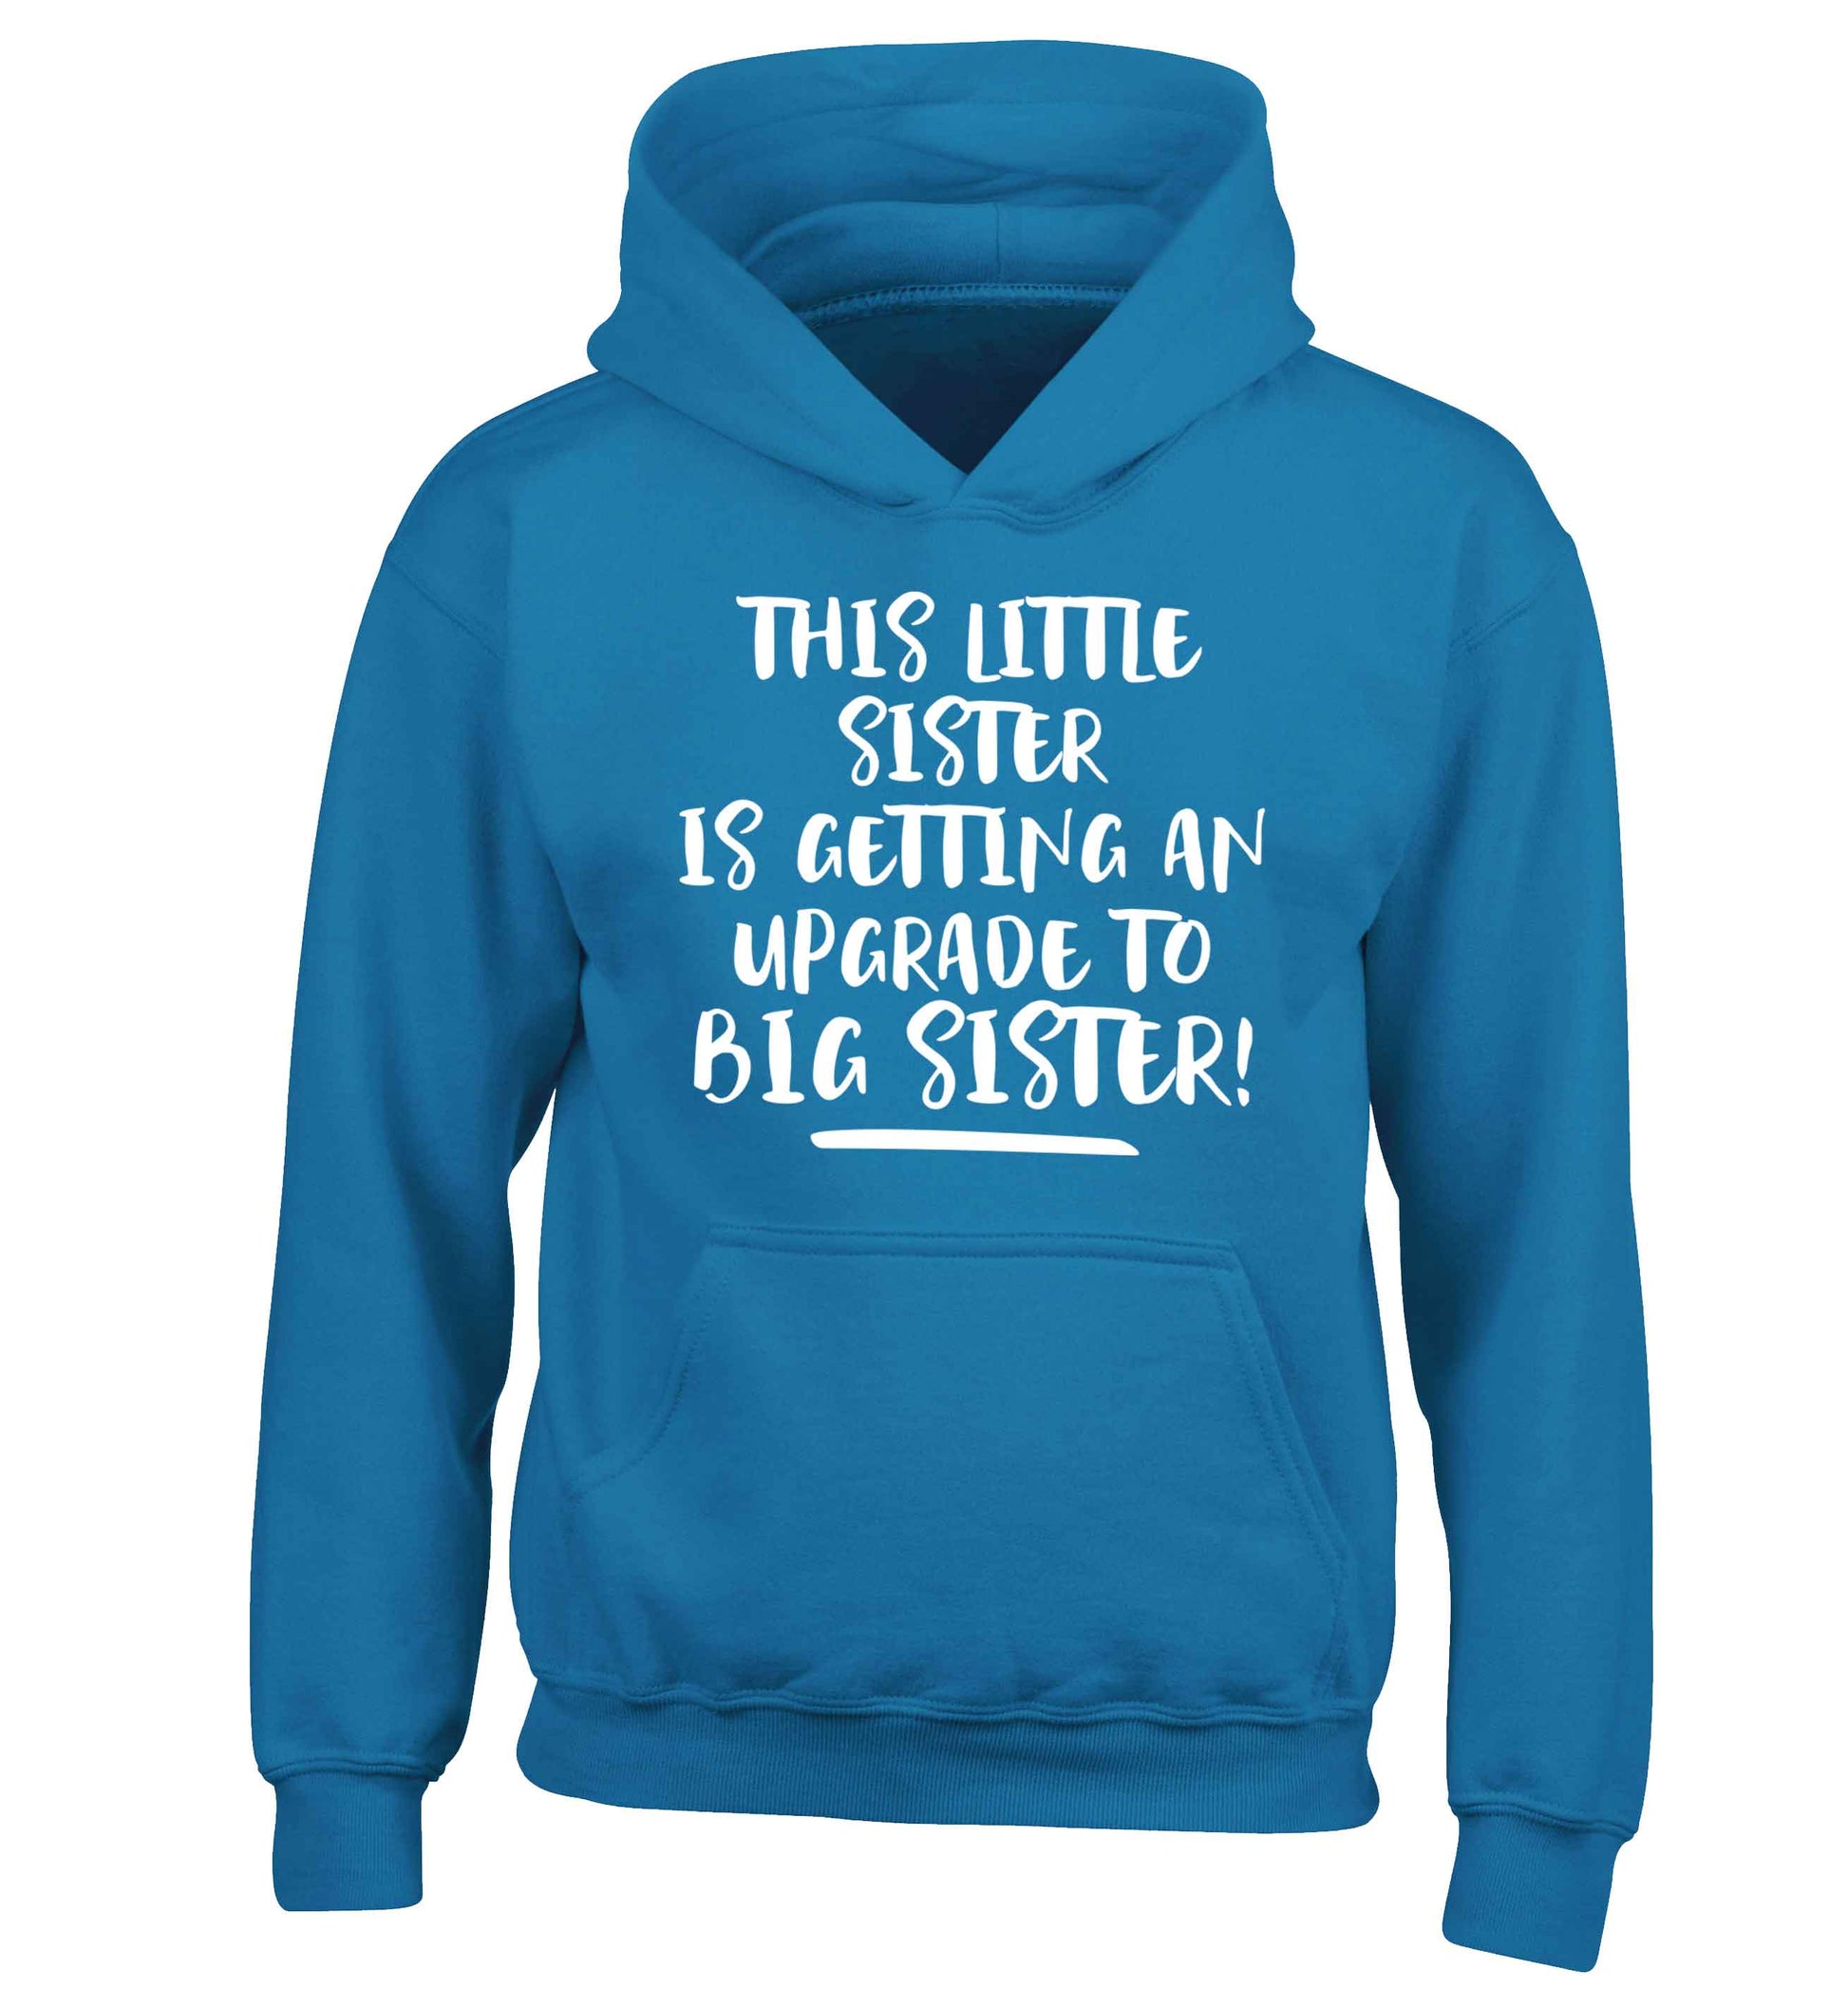 This little sister is getting an upgrade to big sister! children's blue hoodie 12-13 Years